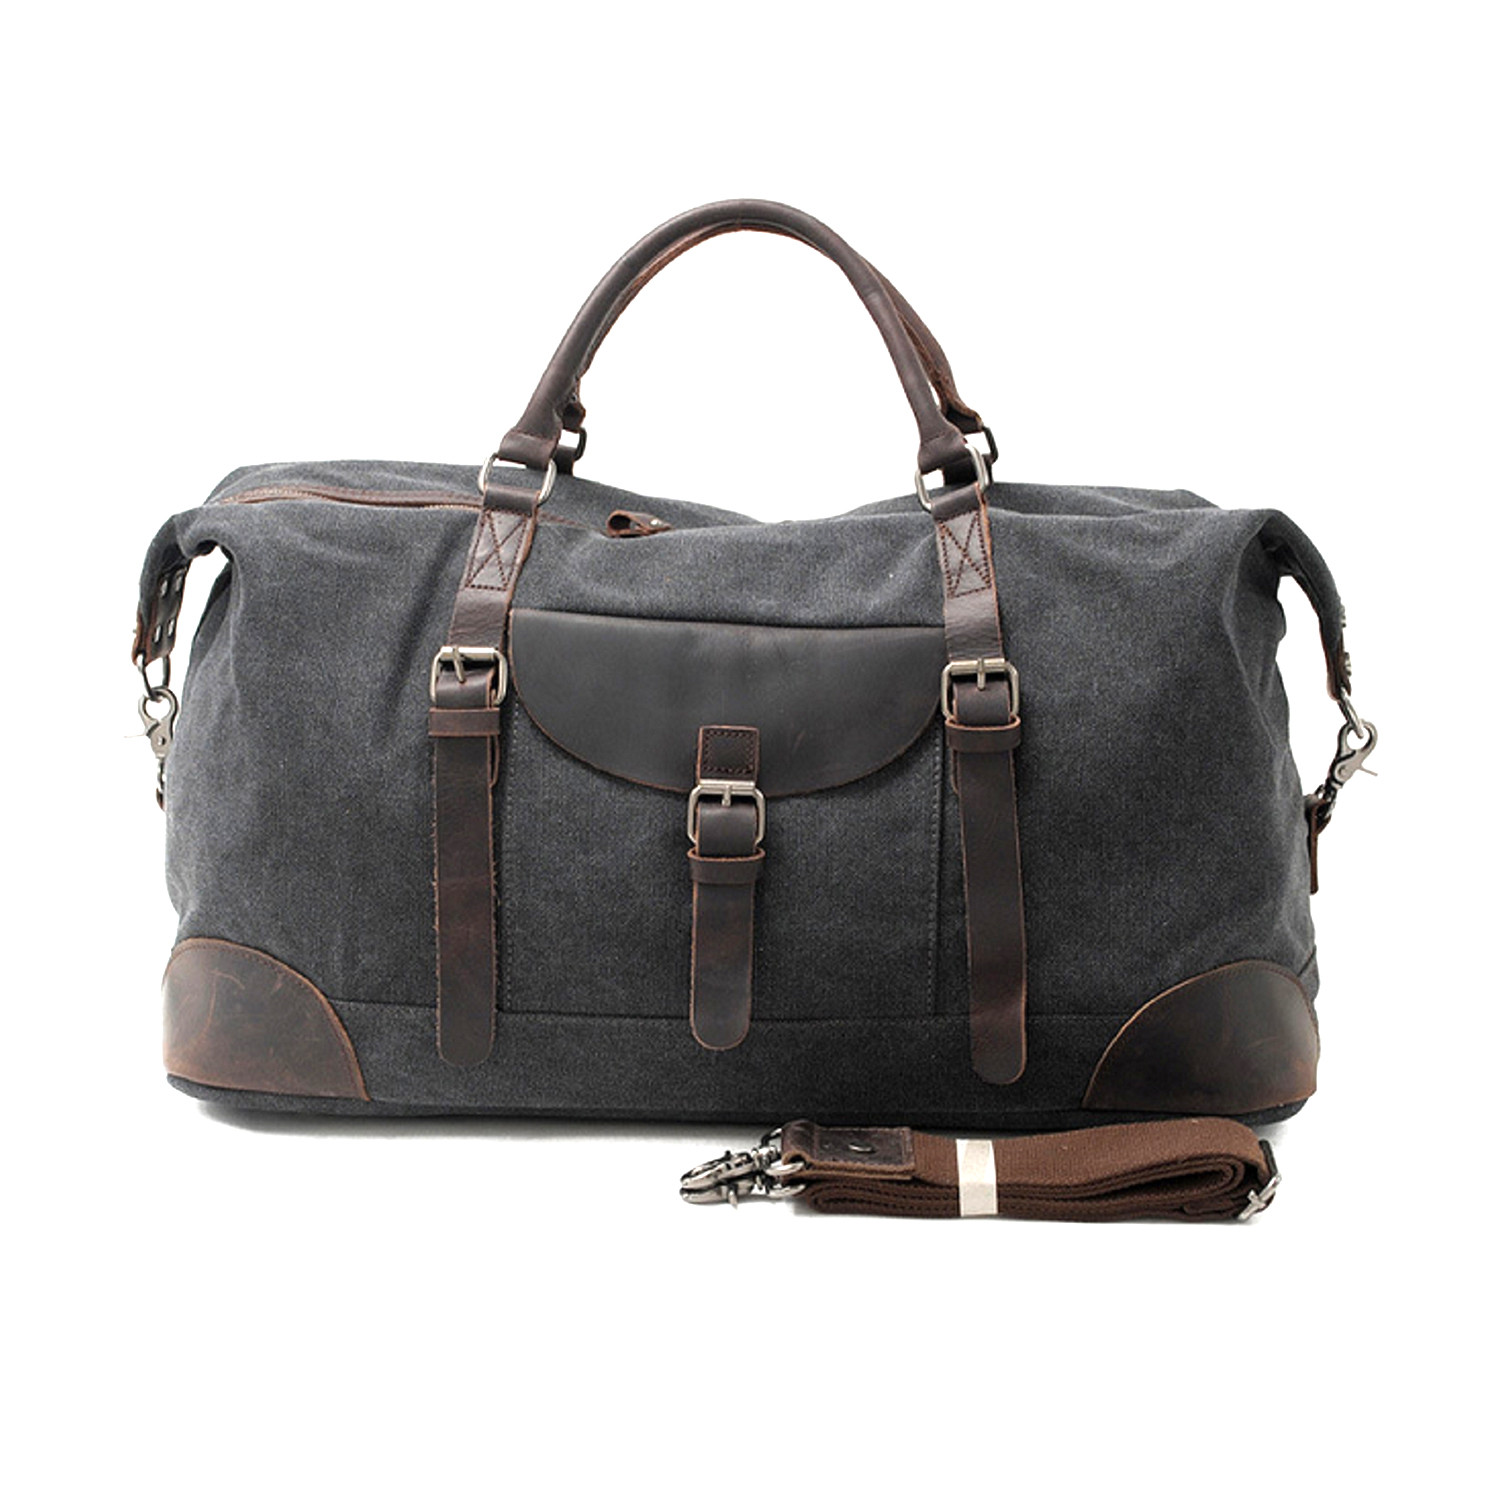 No. 740 Canvas Duffle Bag (Black) - OwnBag - Touch of Modern